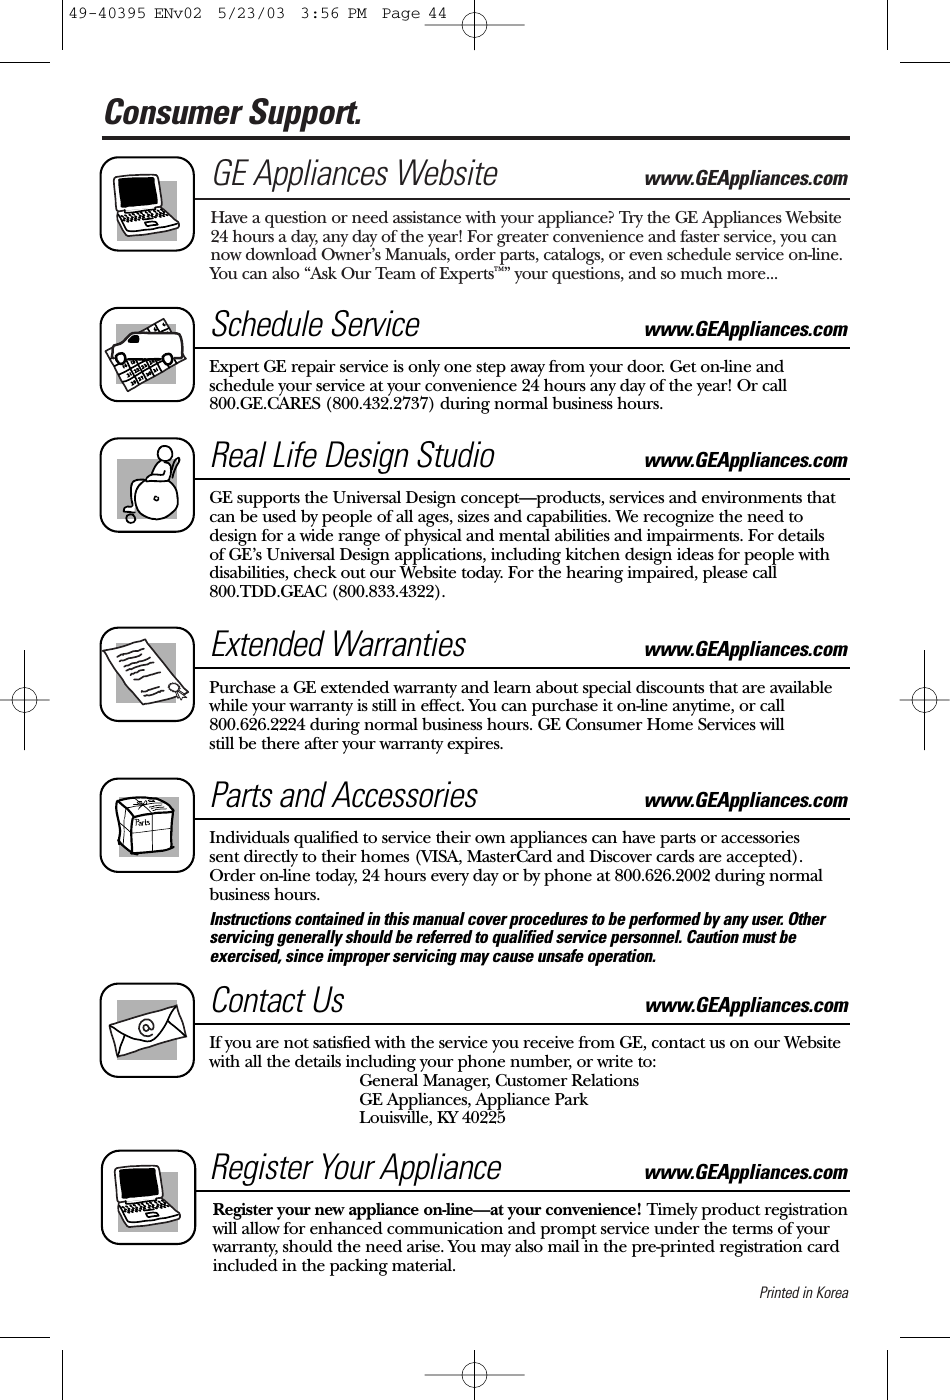 Printed in KoreaConsumer Support. GE Appliances Website www.GEAppliances.comHave a question or need assistance with your appliance? Try the GE Appliances Website24 hours a day, any day of the year! For greater convenience and faster service, you cannow download Owner’s Manuals, order parts, catalogs, or even schedule service on-line.You can also “Ask Our Team of Experts™” your questions, and so much more...Schedule Service www.GEAppliances.comExpert GE repair service is only one step away from your door. Get on-line andschedule your service at your convenience 24 hours any day of the year! Or call800.GE.CARES (800.432.2737) during normal business hours.Real Life Design Studio www.GEAppliances.comGE supports the Universal Design concept—products, services and environments thatcan be used by people of all ages, sizes and capabilities. We recognize the need todesign for a wide range of physical and mental abilities and impairments. For details of GE’s Universal Design applications, including kitchen design ideas for people withdisabilities, check out our Website today. For the hearing impaired, please call 800.TDD.GEAC (800.833.4322). Extended Warranties www.GEAppliances.comPurchase a GE extended warranty and learn about special discounts that are availablewhile your warranty is still in effect. You can purchase it on-line anytime, or call 800.626.2224 during normal business hours. GE Consumer Home Services will still be there after your warranty expires.Parts and Accessories  www.GEAppliances.comIndividuals qualified to service their own appliances can have parts or accessories sent directly to their homes (VISA, MasterCard and Discover cards are accepted). Order on-line today, 24 hours every day or by phone at 800.626.2002 during normalbusiness hours.Instructions contained in this manual cover procedures to be performed by any user. Otherservicing generally should be referred to qualified service personnel. Caution must beexercised, since improper servicing may cause unsafe operation. Contact Us www.GEAppliances.comIf you are not satisfied with the service you receive from GE, contact us on our Websitewith all the details including your phone number, or write to: General Manager, Customer RelationsGE Appliances, Appliance ParkLouisville, KY 40225Register Your Appliance www.GEAppliances.comRegister your new appliance on-line—at your convenience! Timely product registrationwill allow for enhanced communication and prompt service under the terms of yourwarranty, should the need arise. You may also mail in the pre-printed registration cardincluded in the packing material.49-40395 ENv02  5/23/03  3:56 PM  Page 44